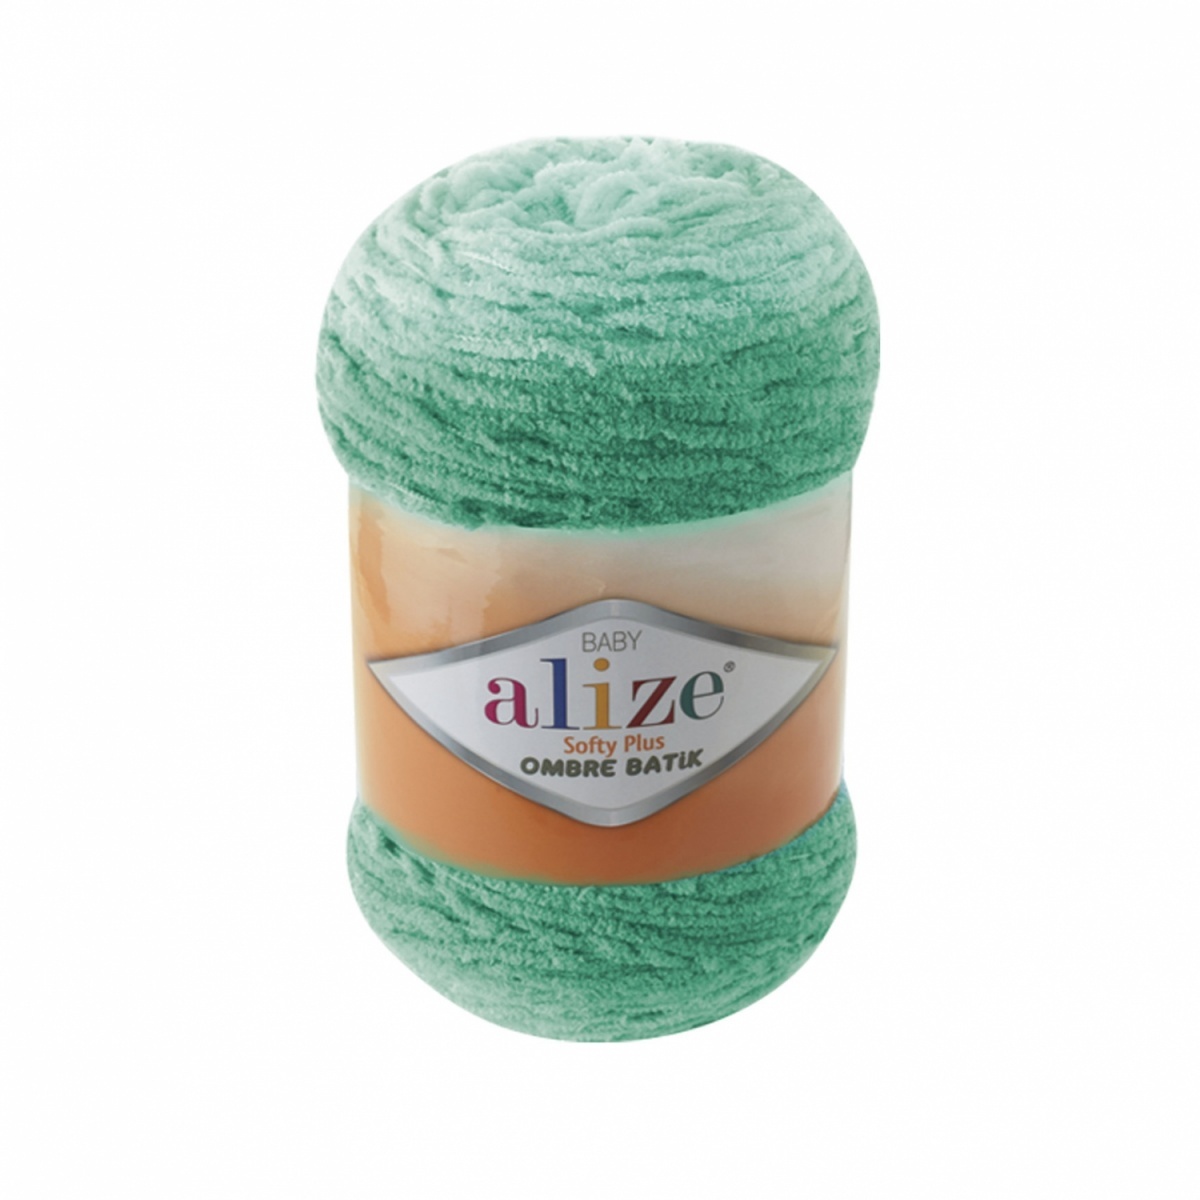 Alize Softy Plus Ombre Batik, 100% Micropolyester 1 Skein Value Pack, 500g фото 1